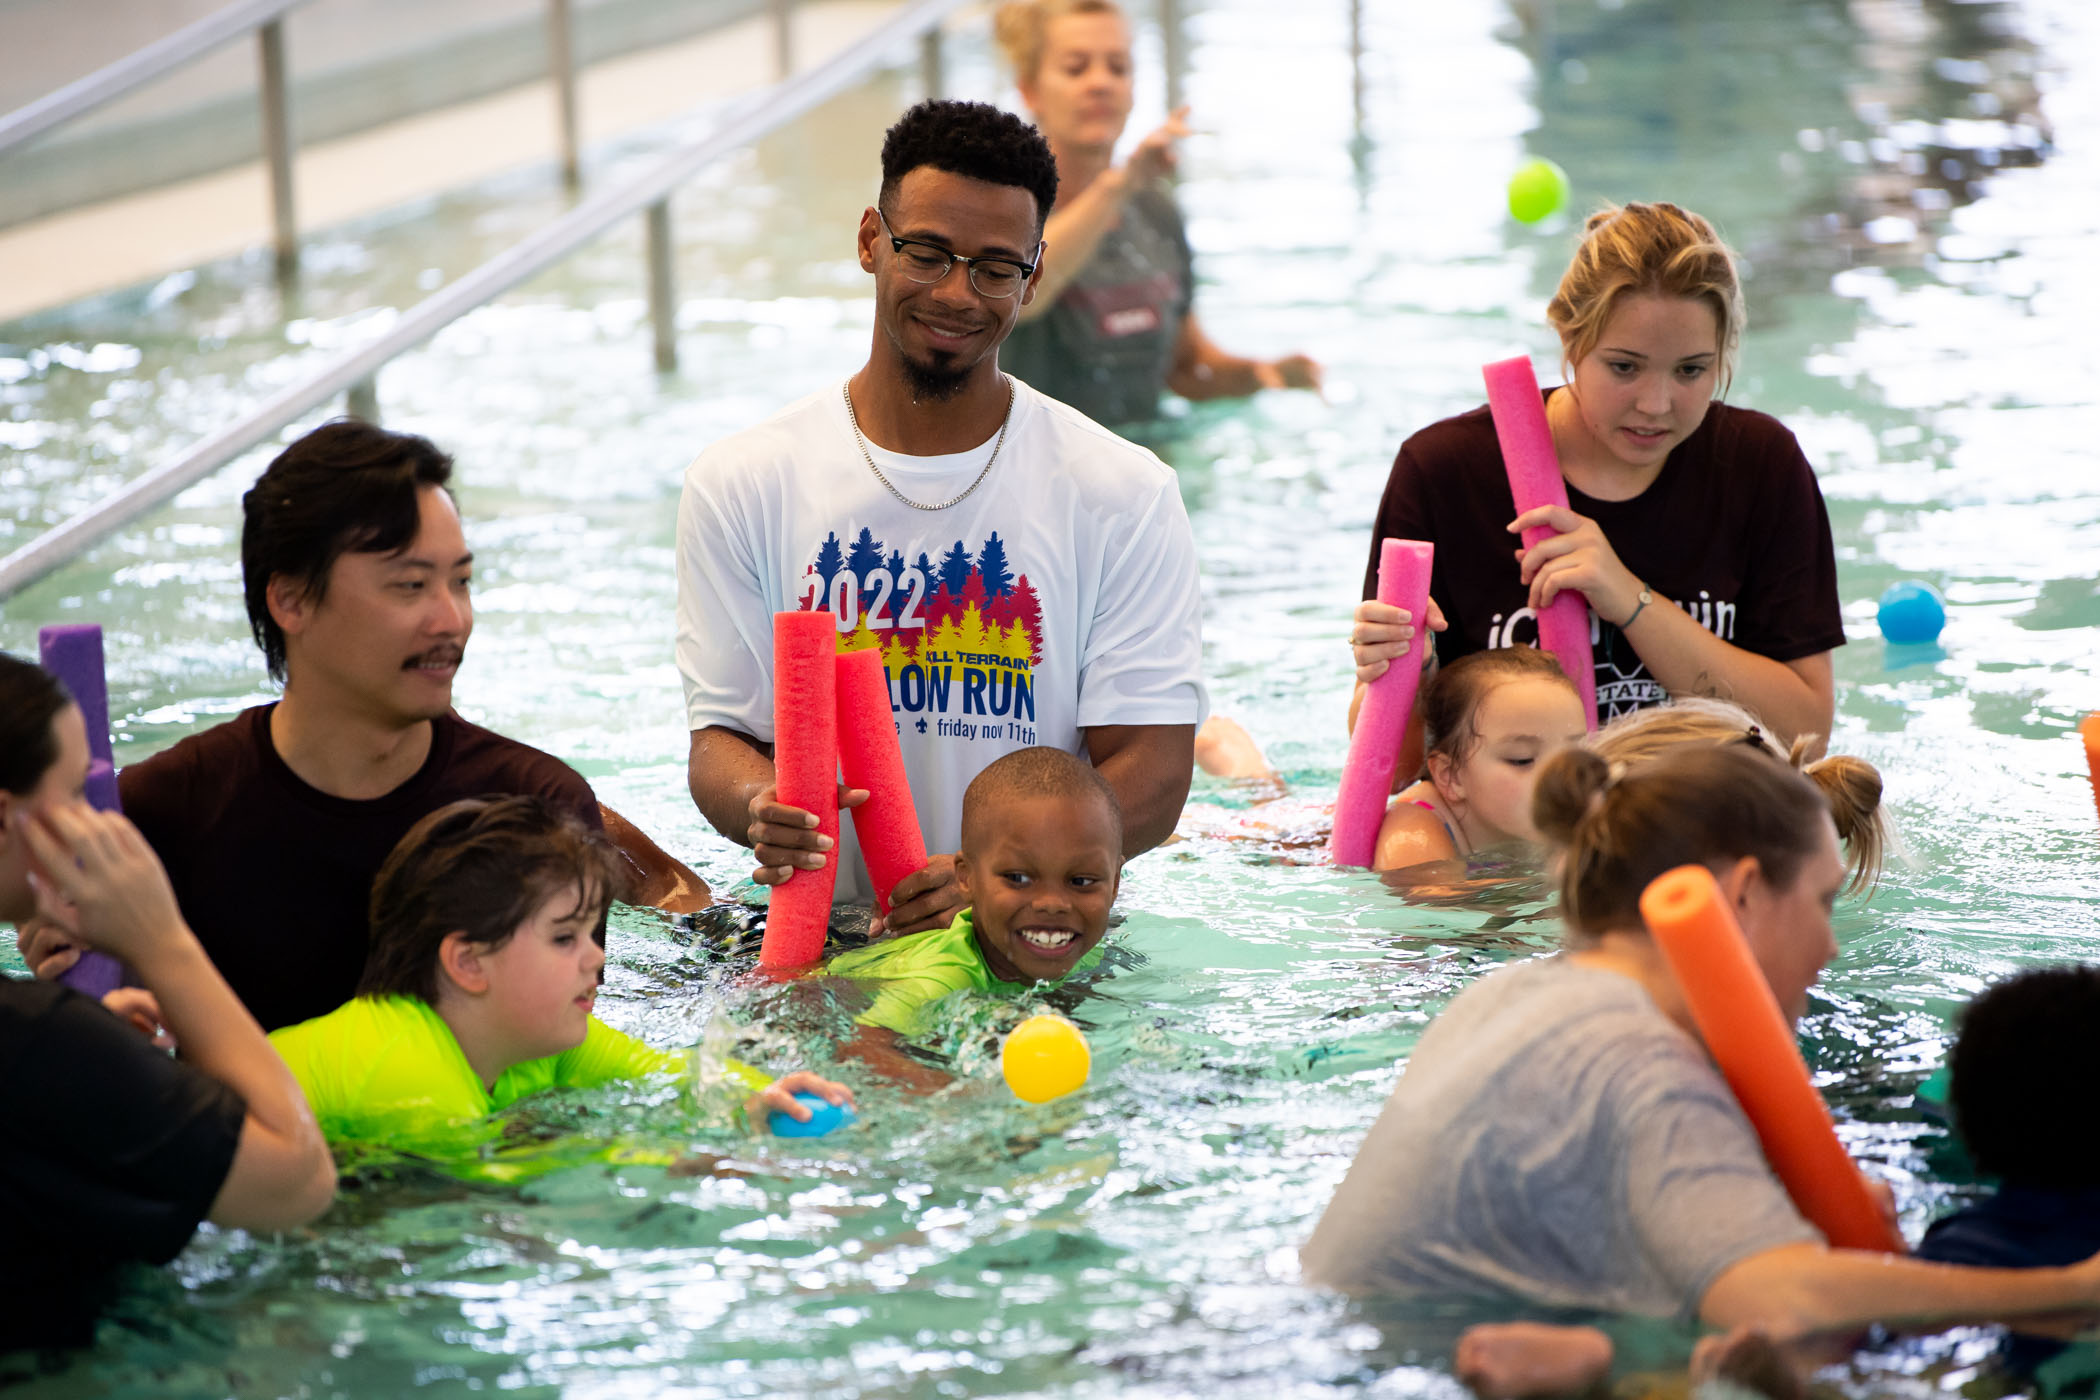 Staff members of MSU&#039;s Kinesiology department help participating students of the program&#039;s Adapted Swim Camp build confidence and skills in the Sanderson Center pool.